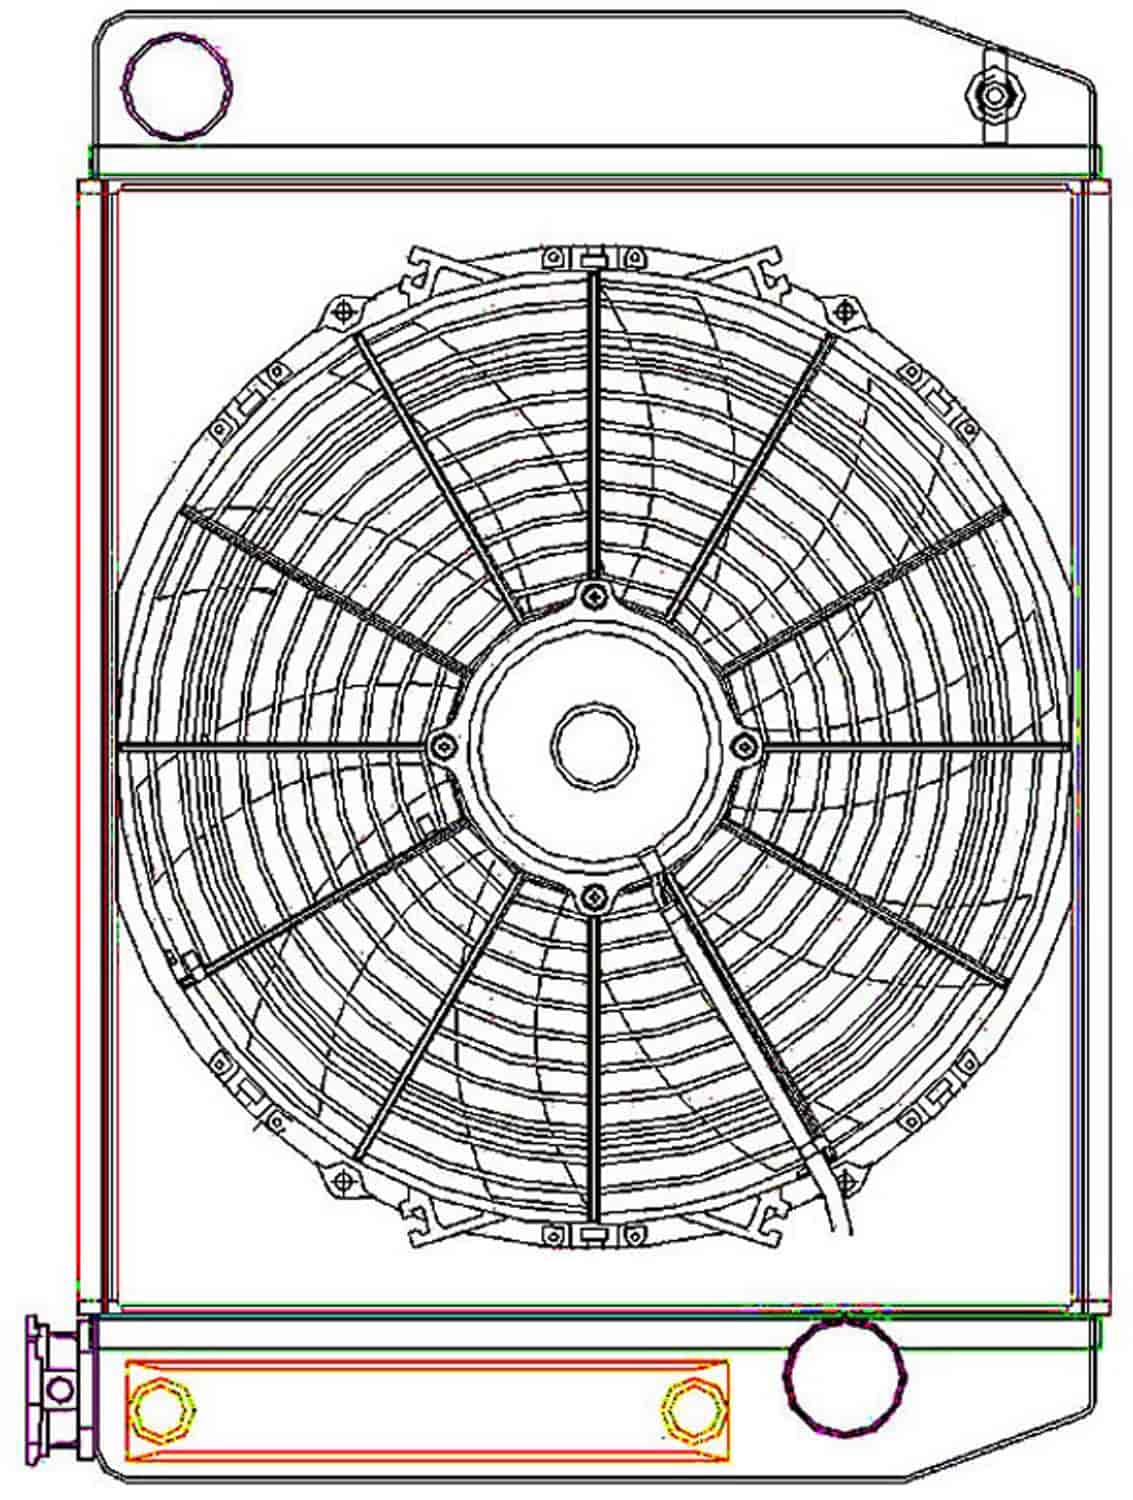 ClassicCool ComboUnit Universal Fit Radiator and Fan Single Pass Crossflow Design 22" x 15.50" with Transmission Cooler